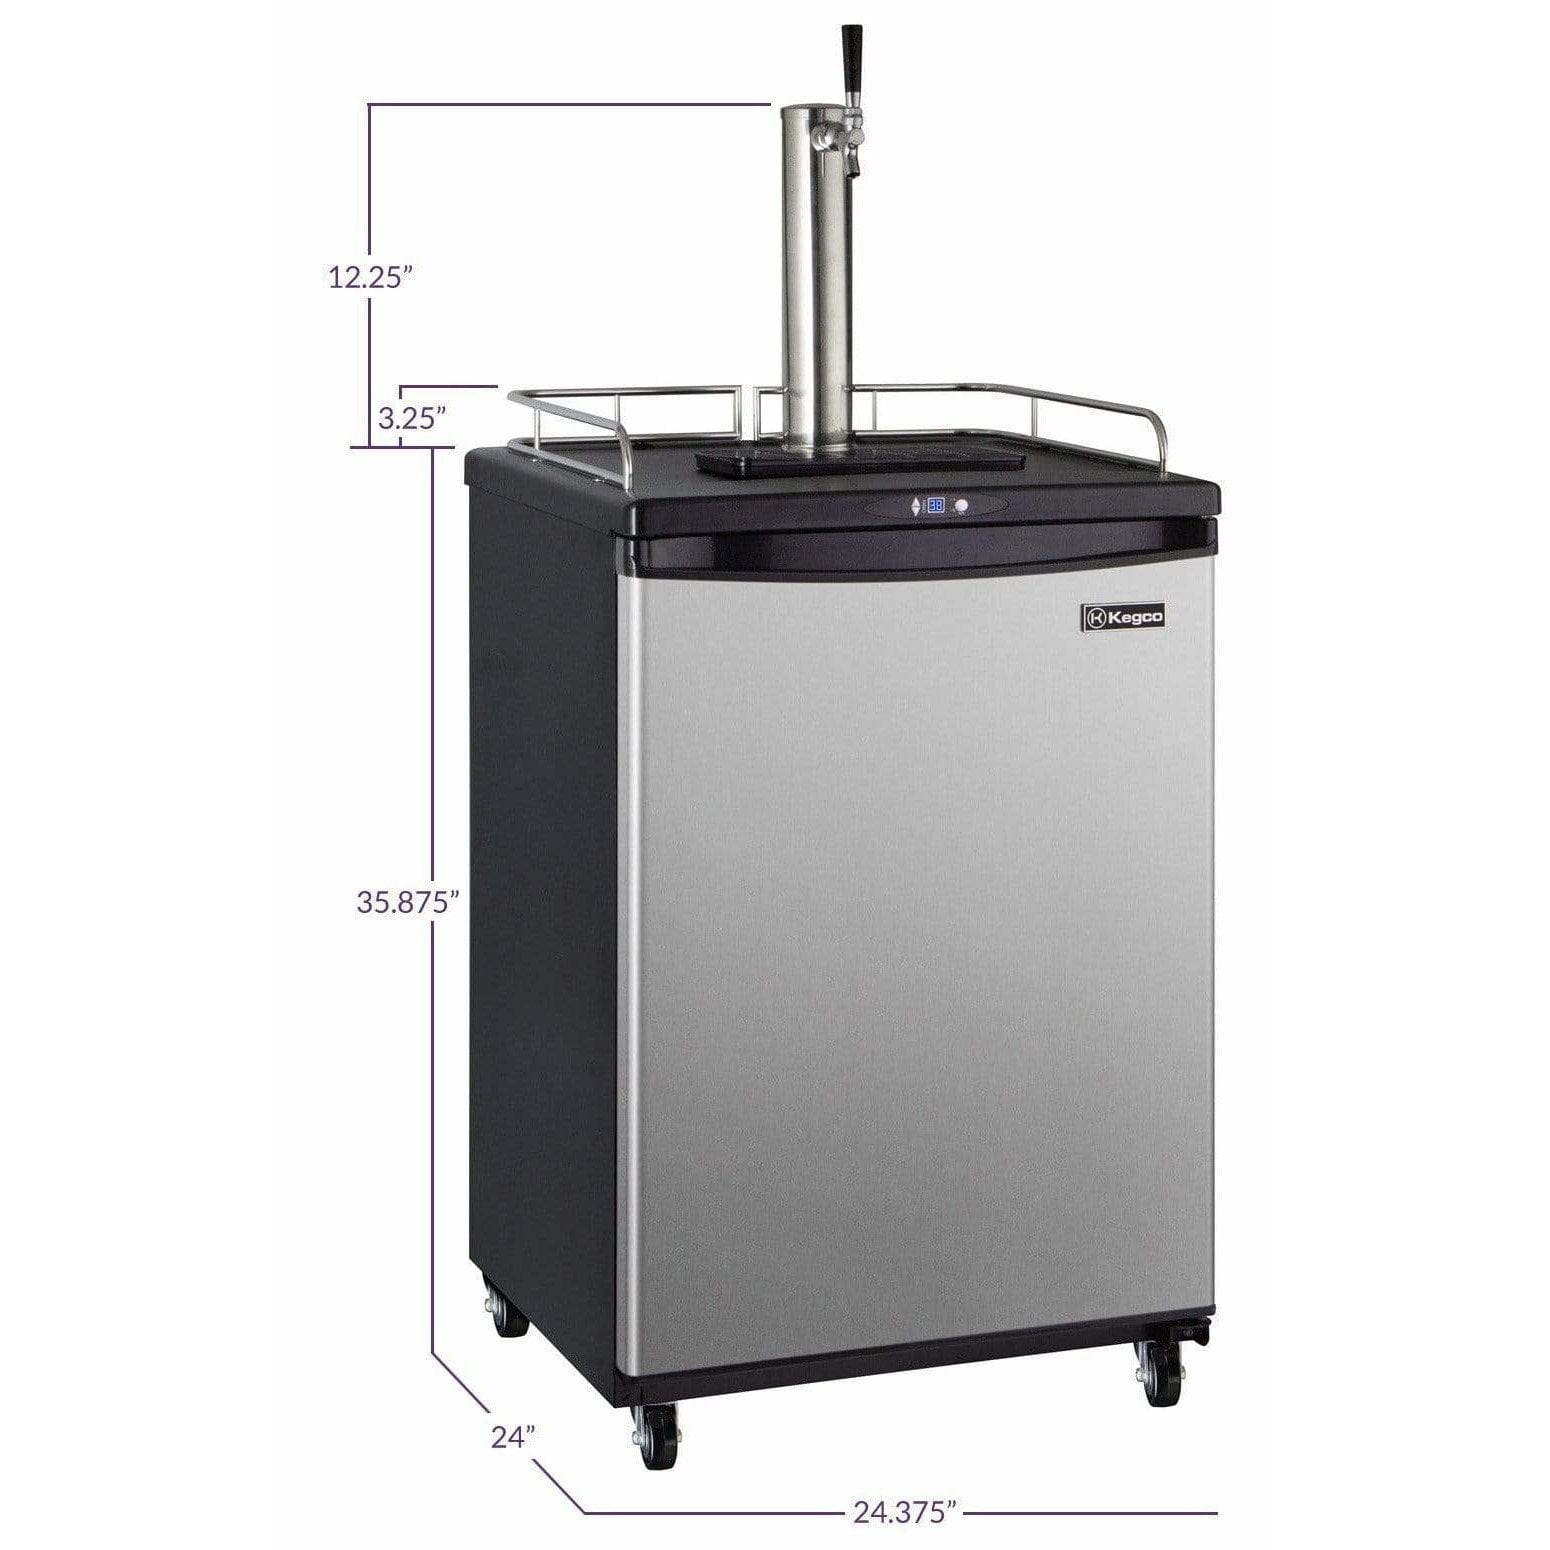 Kegco 24" Wide Cold Brew Coffee Single Tap Stainless Steel Kegerator ICZ163S-1 Wine Coolers Empire